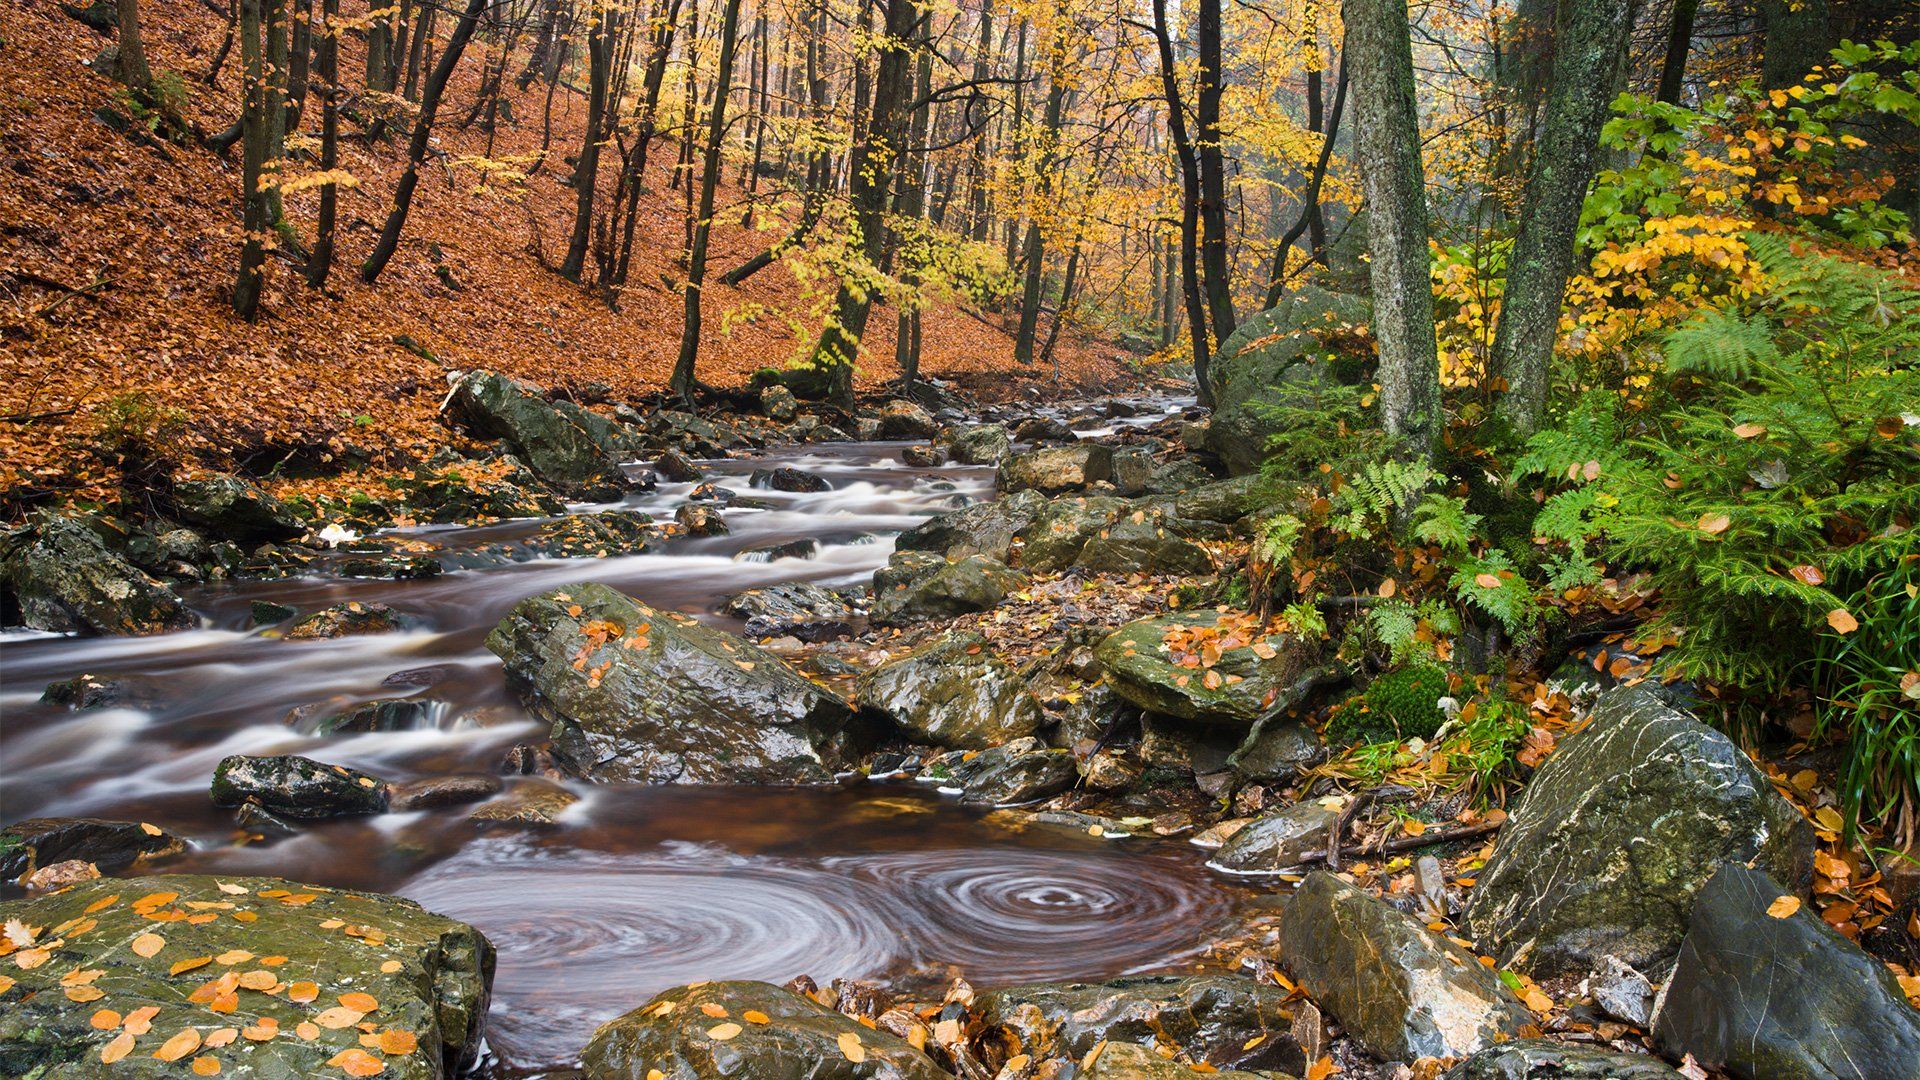 A mountain stream flows through an autumnal landscape, with ferns and rocks in the foreground.